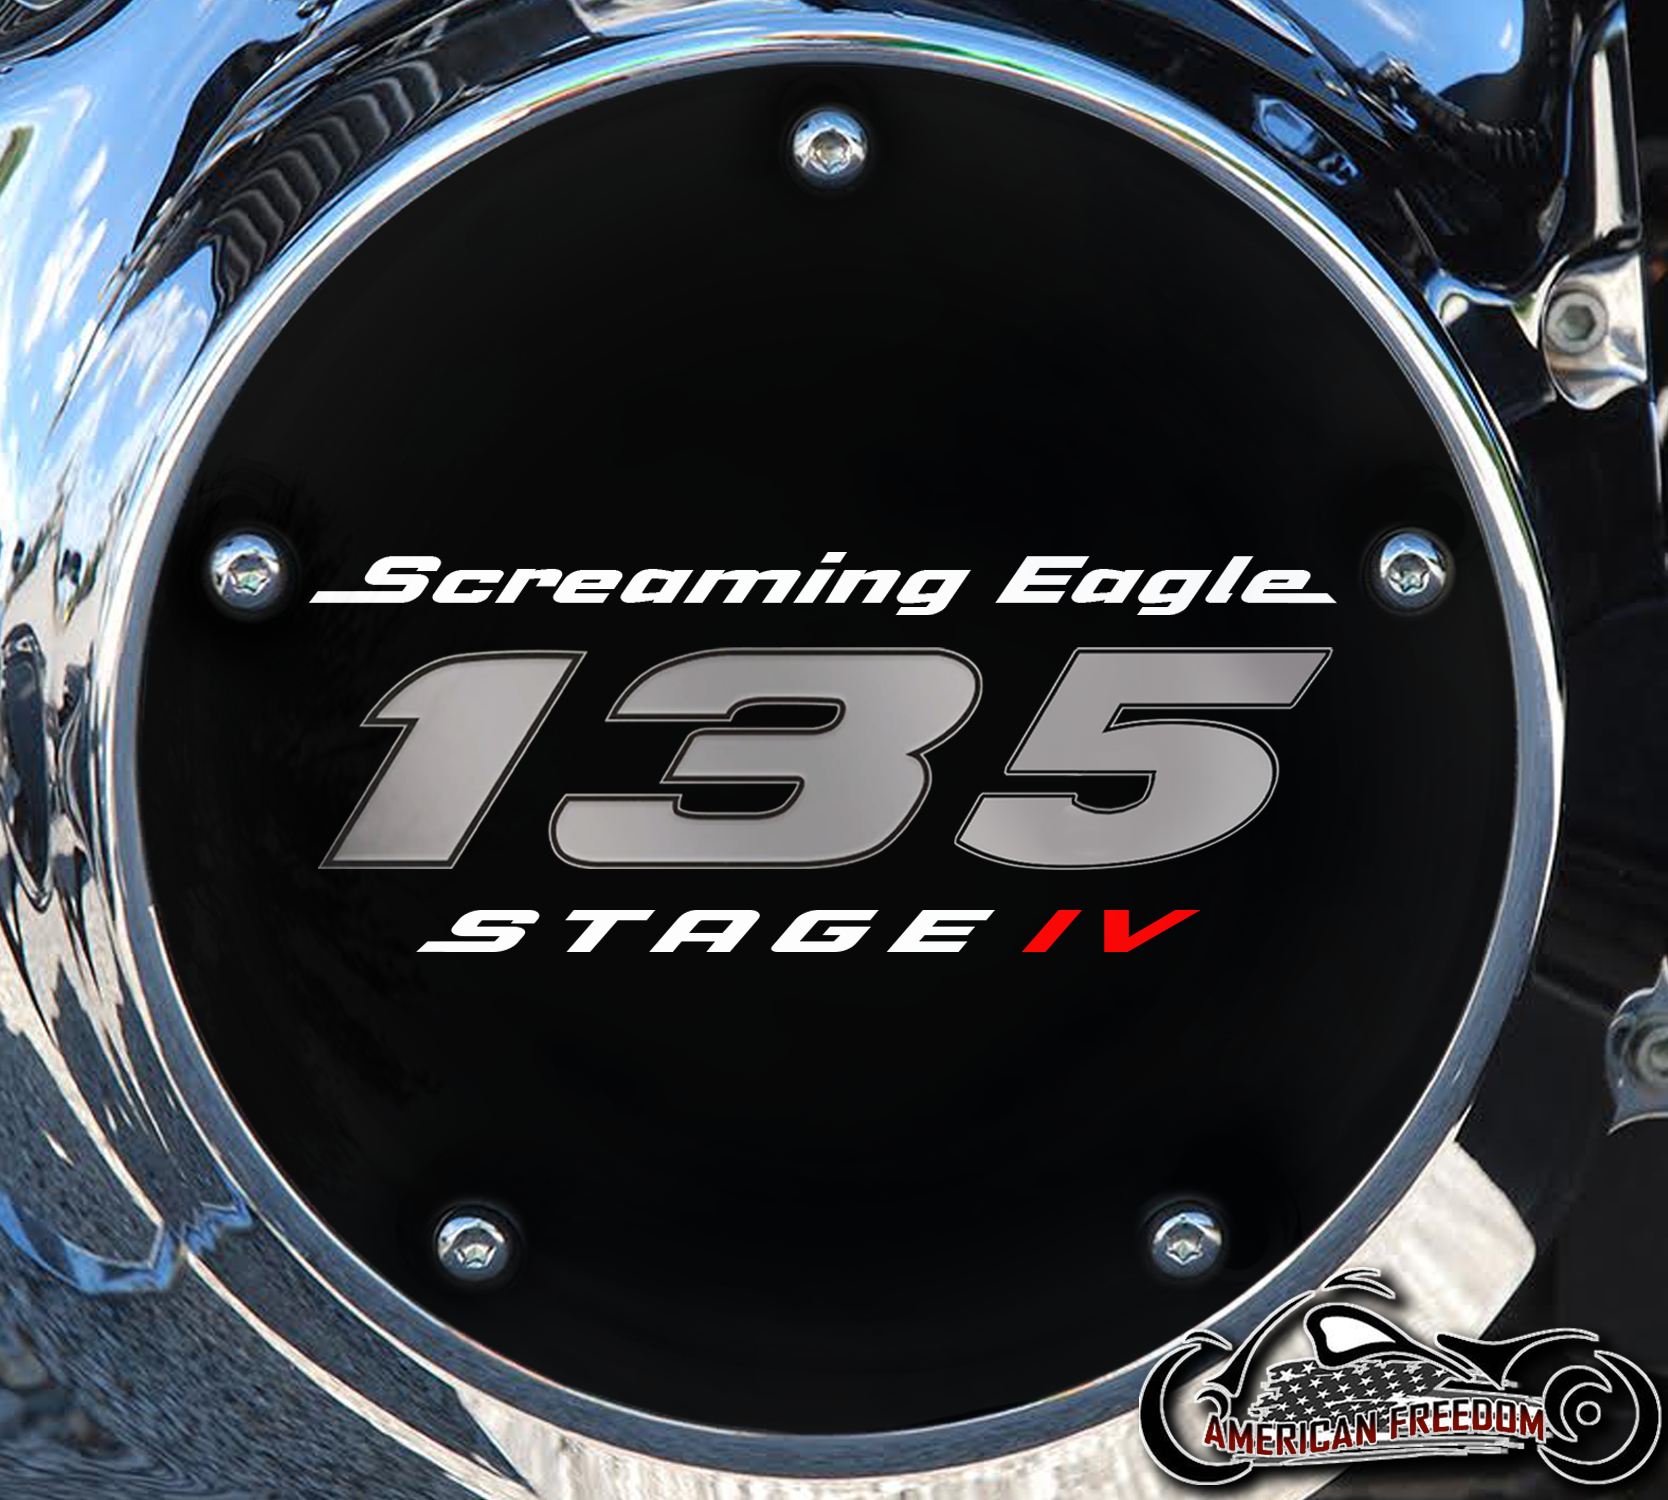 Screaming Eagle Stage IV 135 Derby Cover